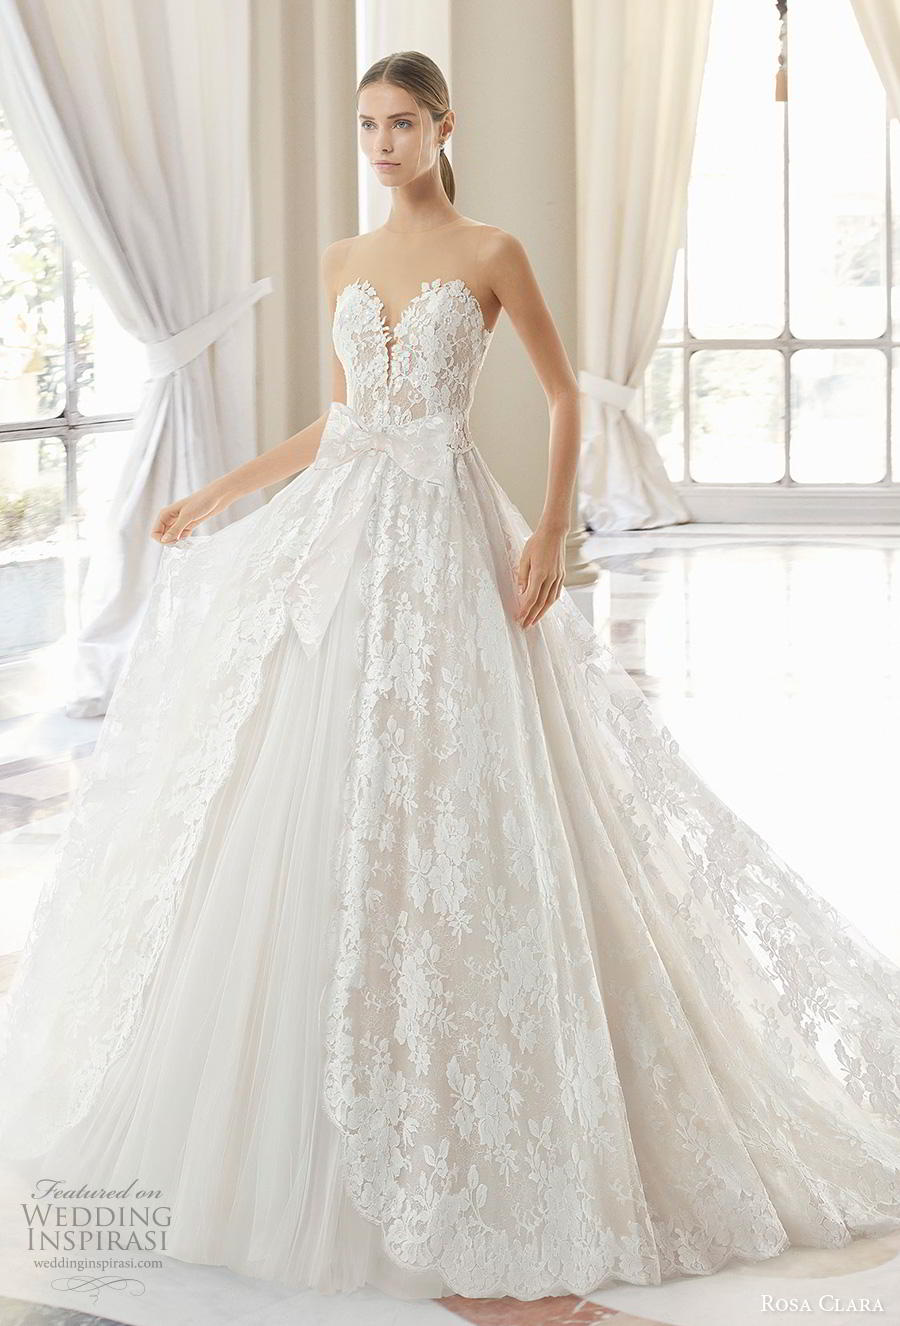 Rosa Clara Couture  The White Collection Bridal